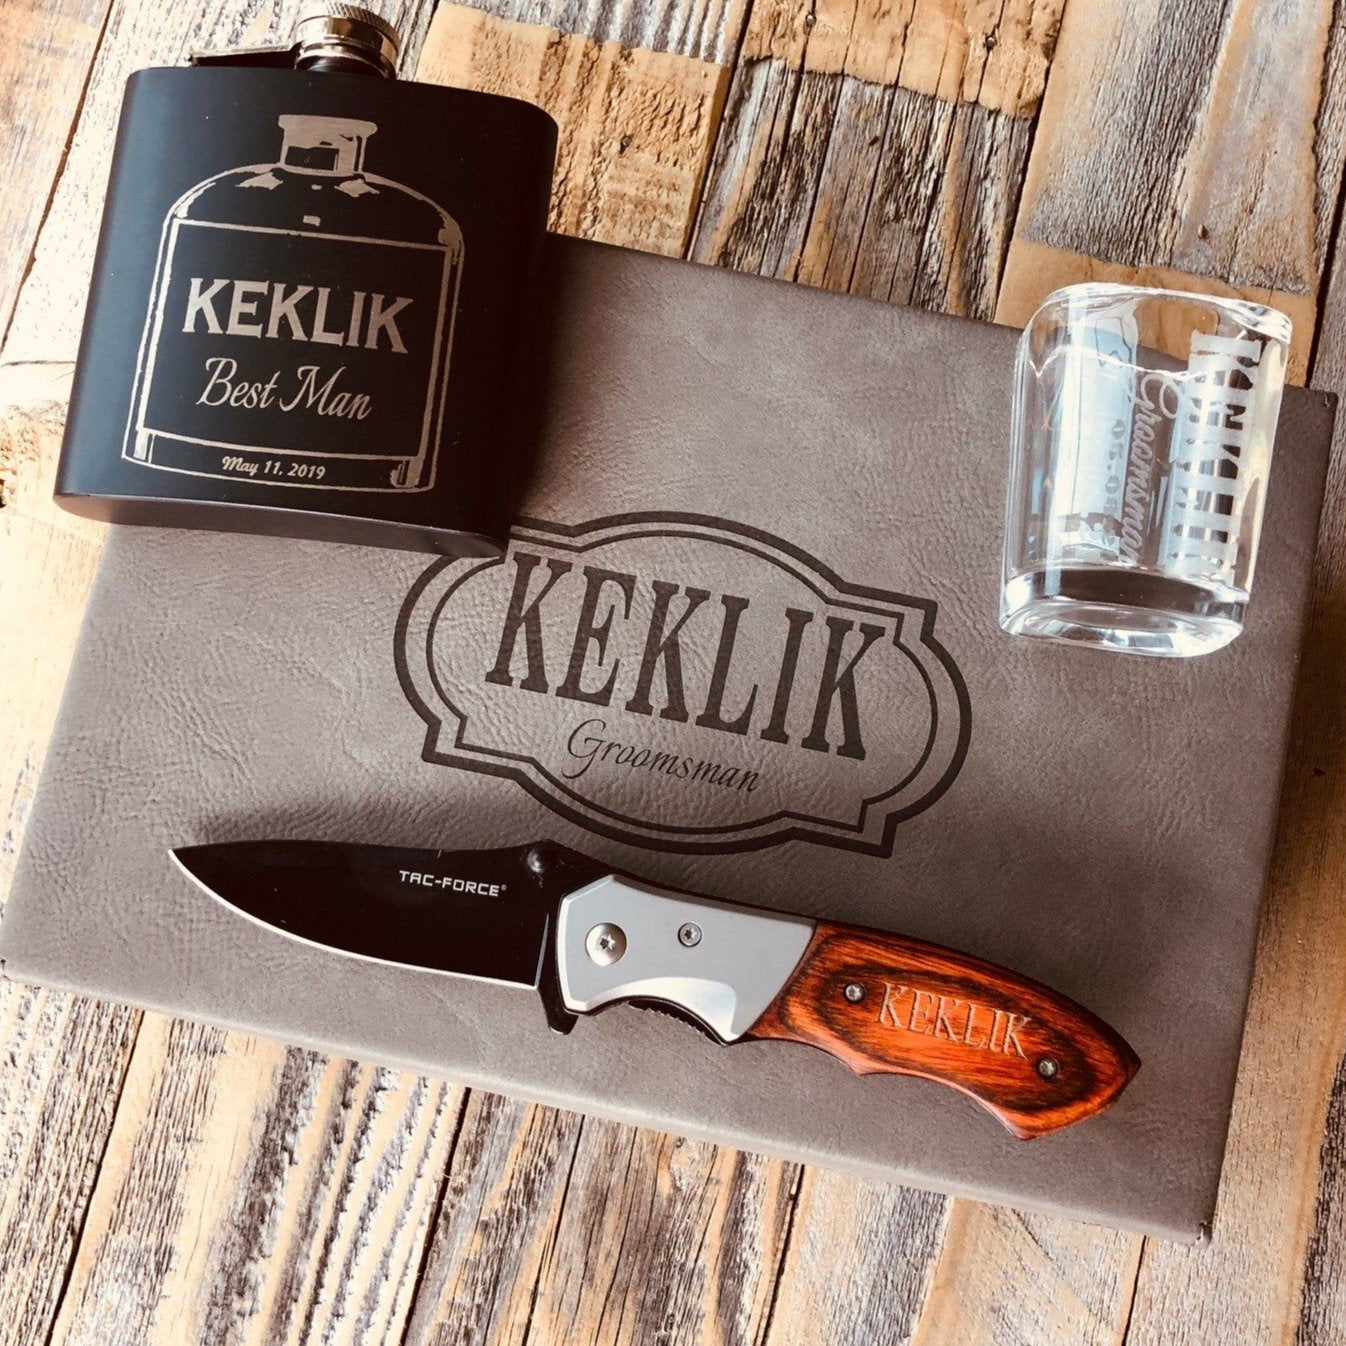 Unique Groomsman Thank You Set: Customized Flask, Knife & Shot Glass - Memorable and Bold Gift Choice